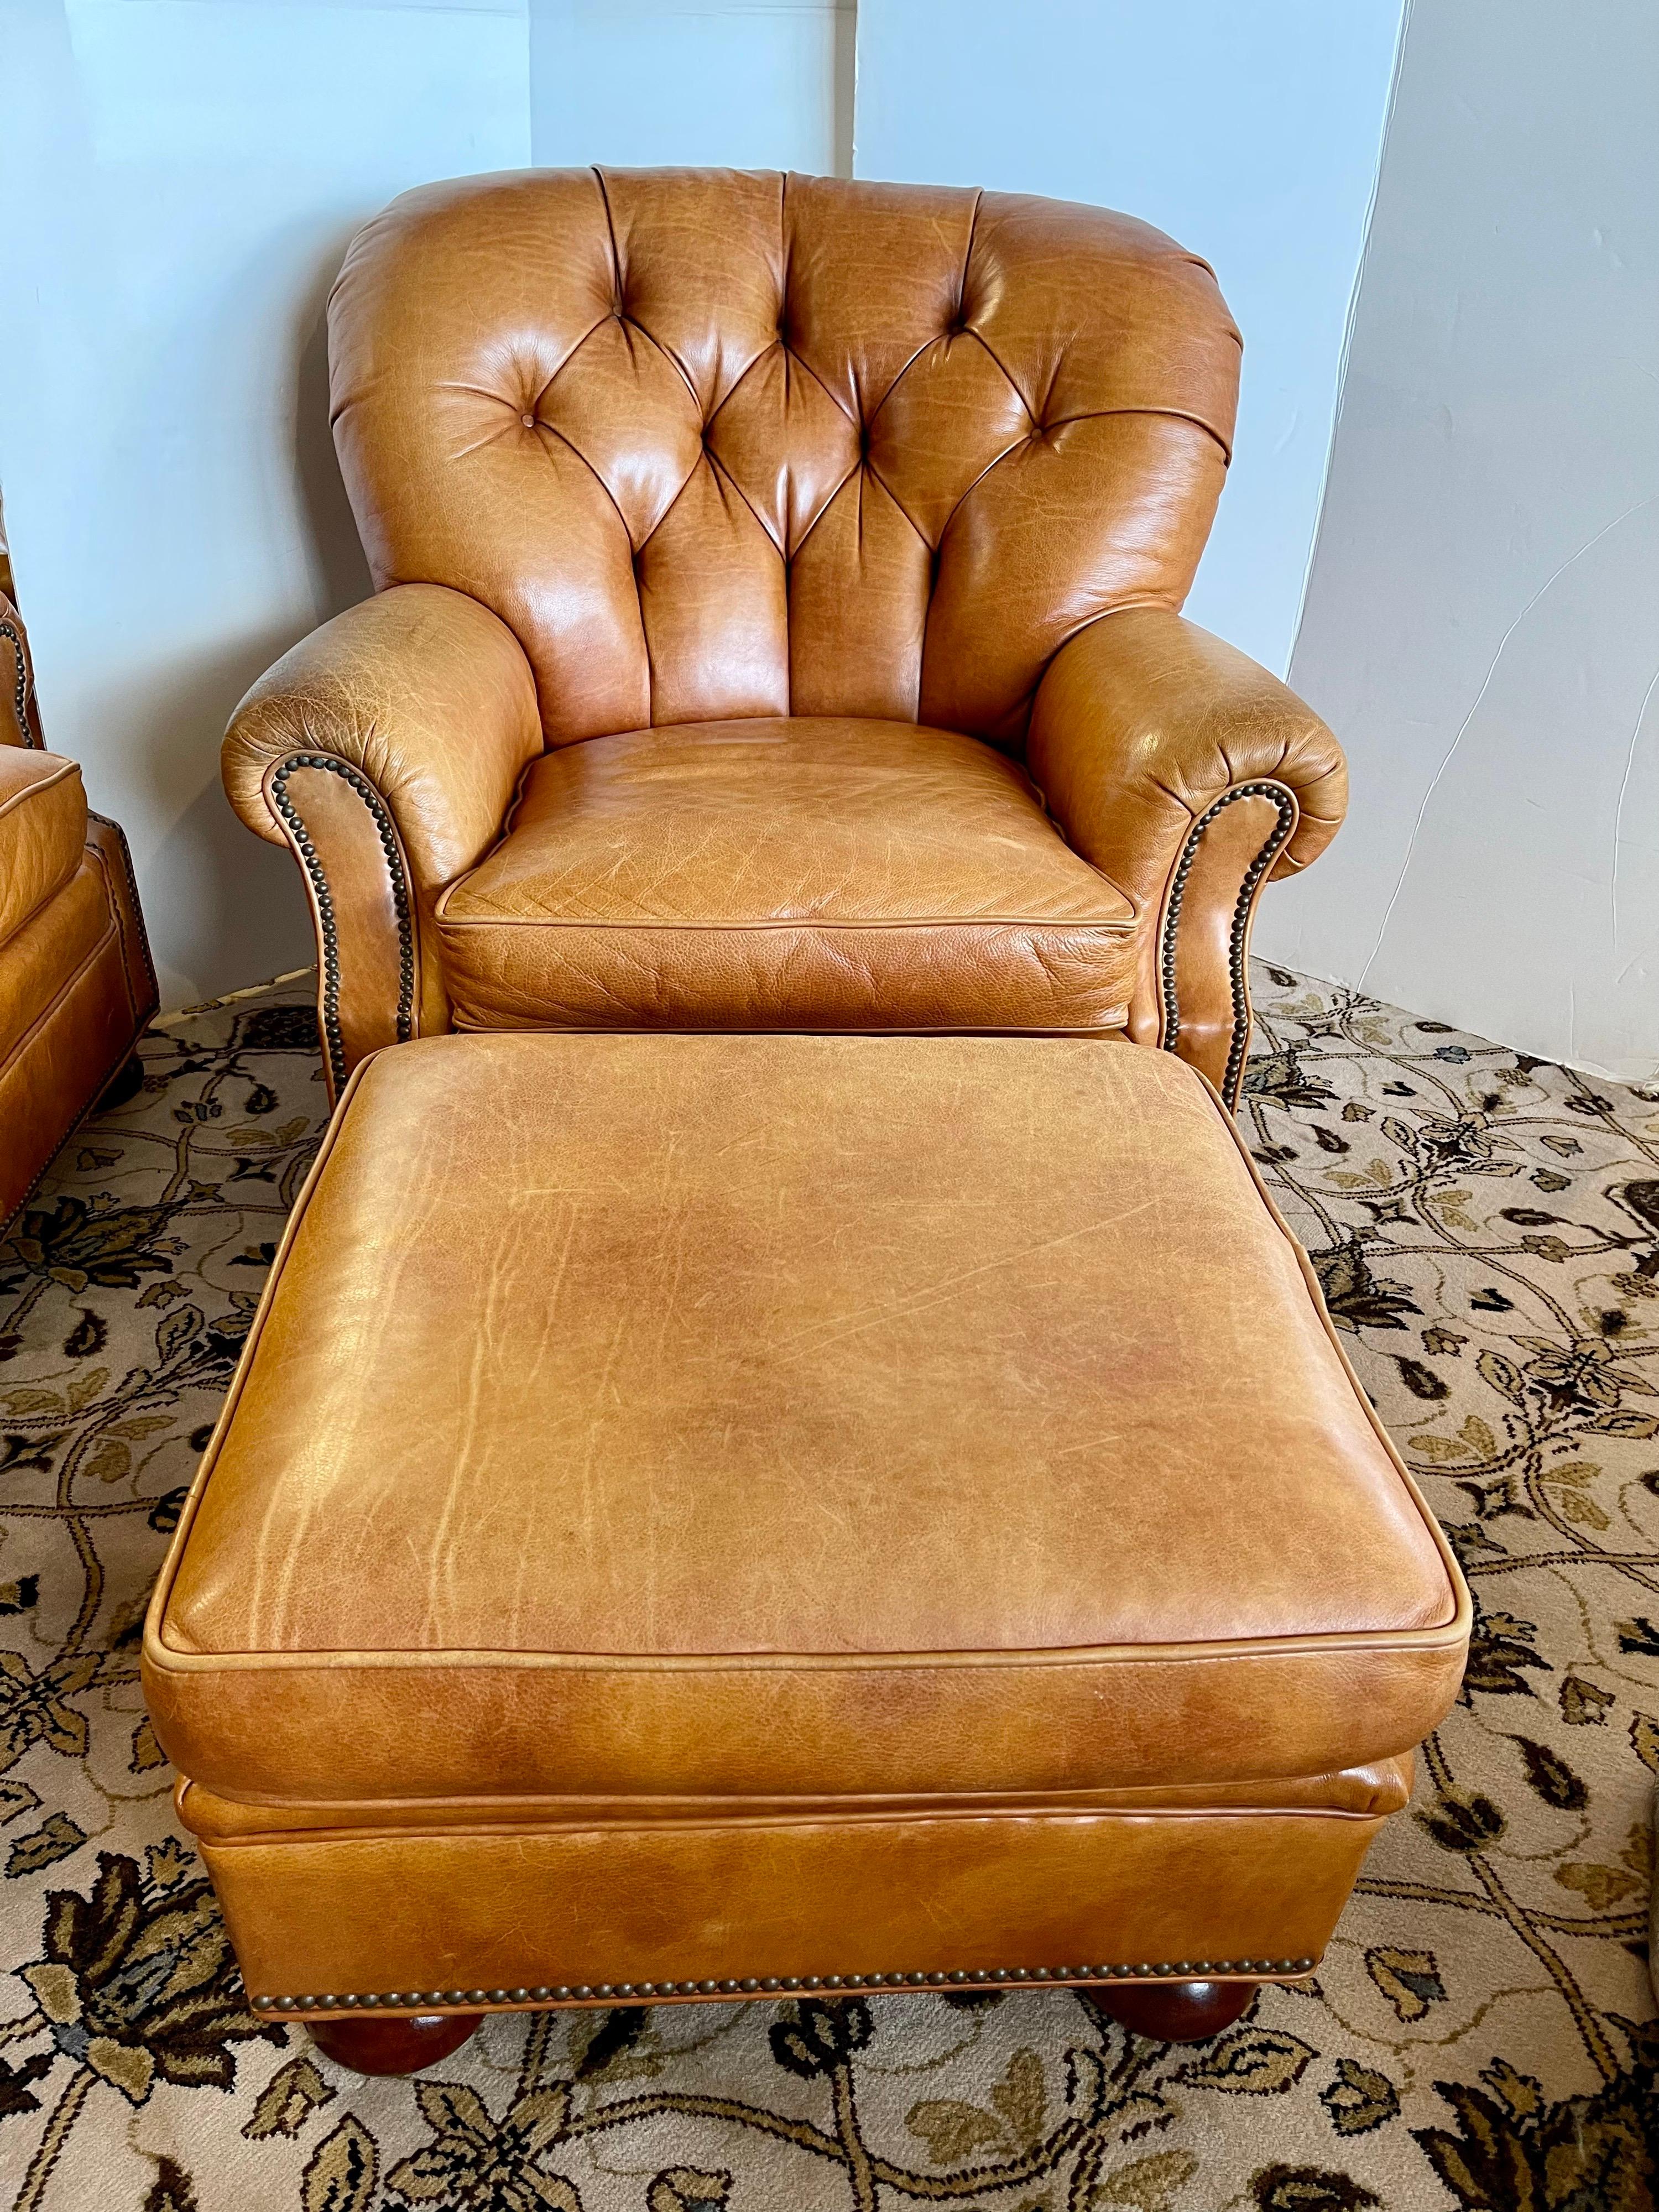 Elegant signed Hickory Chair Company vintage chesterfield leather wingback chair with matching ottoman. Iconic cigar chair vibes throughout. The leather is a caramel color and is perfectly broken in with just the right amount of wear to give it an